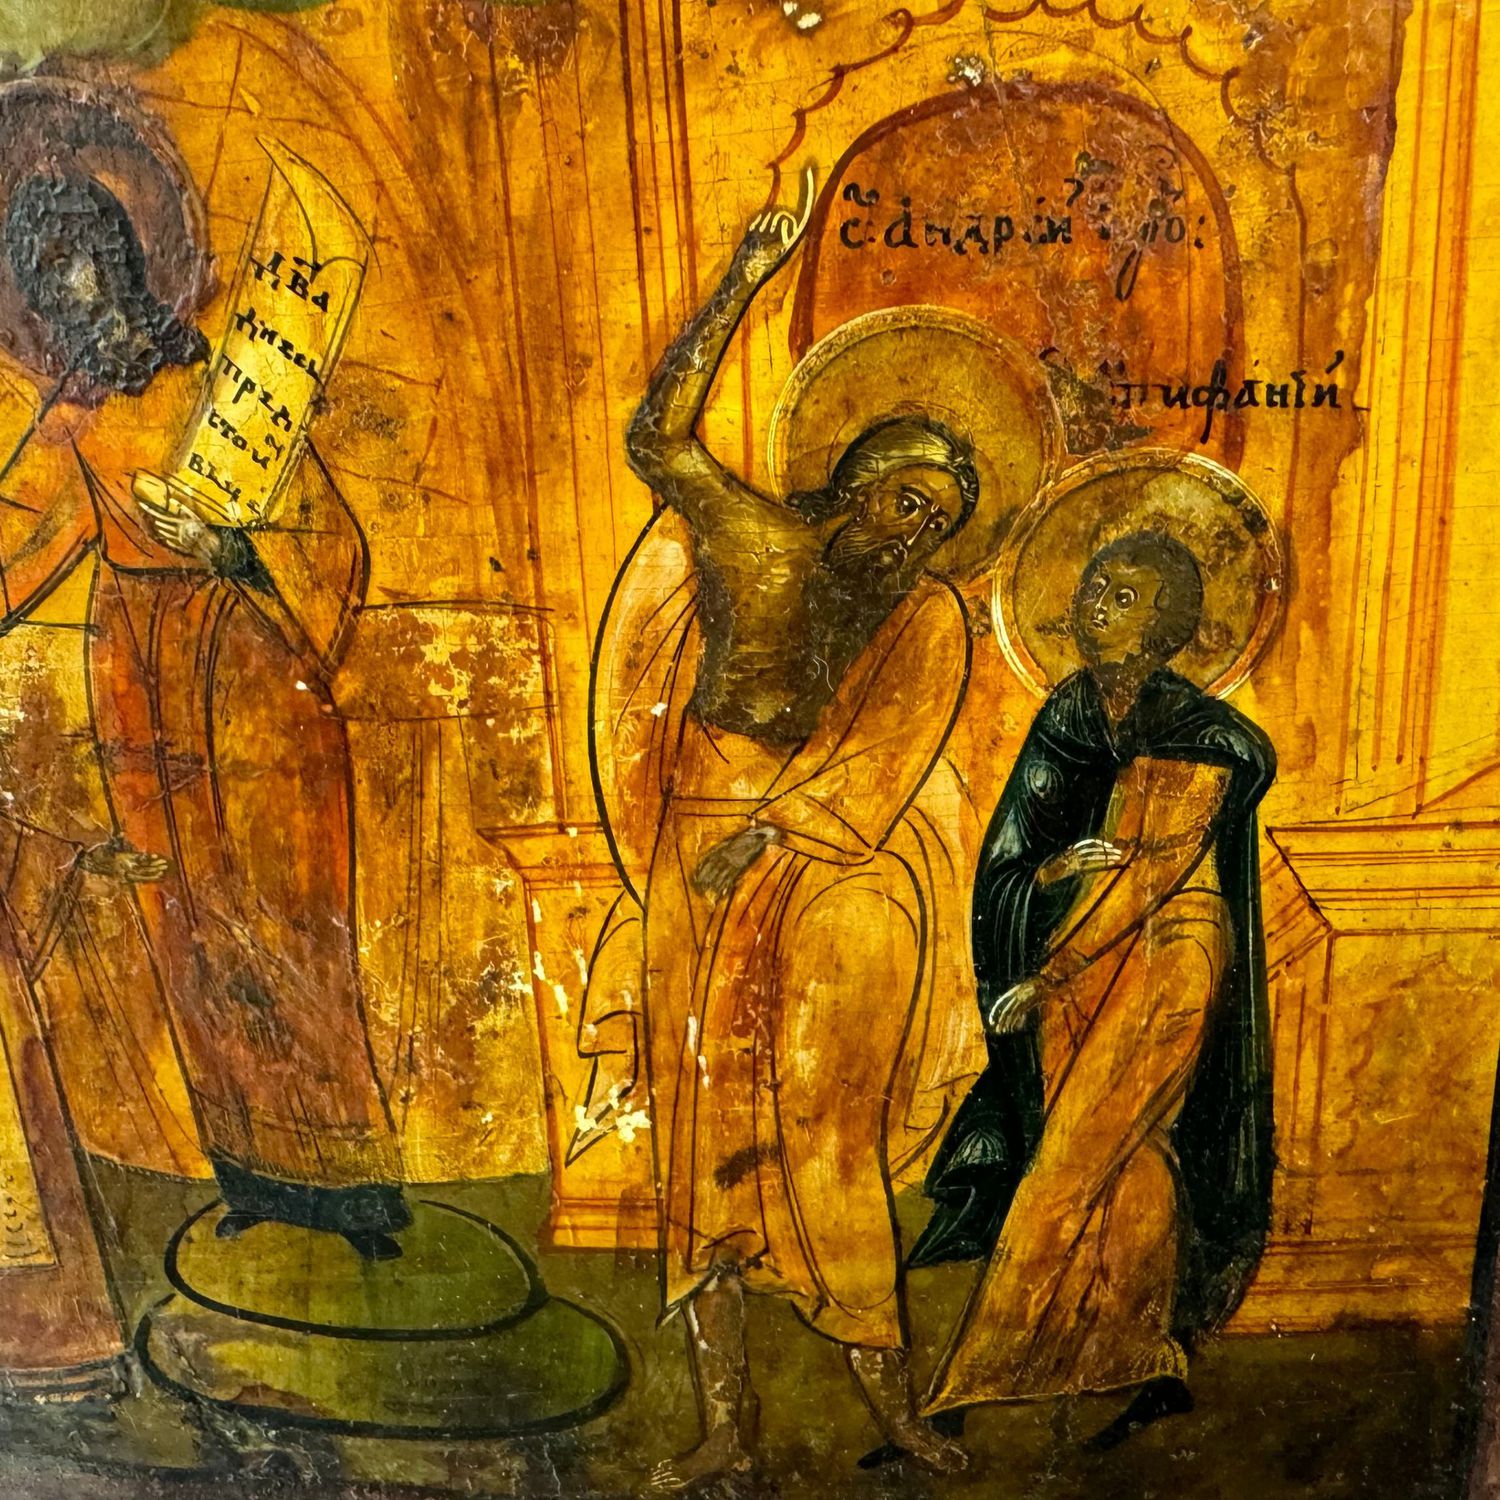 Biblical scene on a gold background - Image 2 of 11